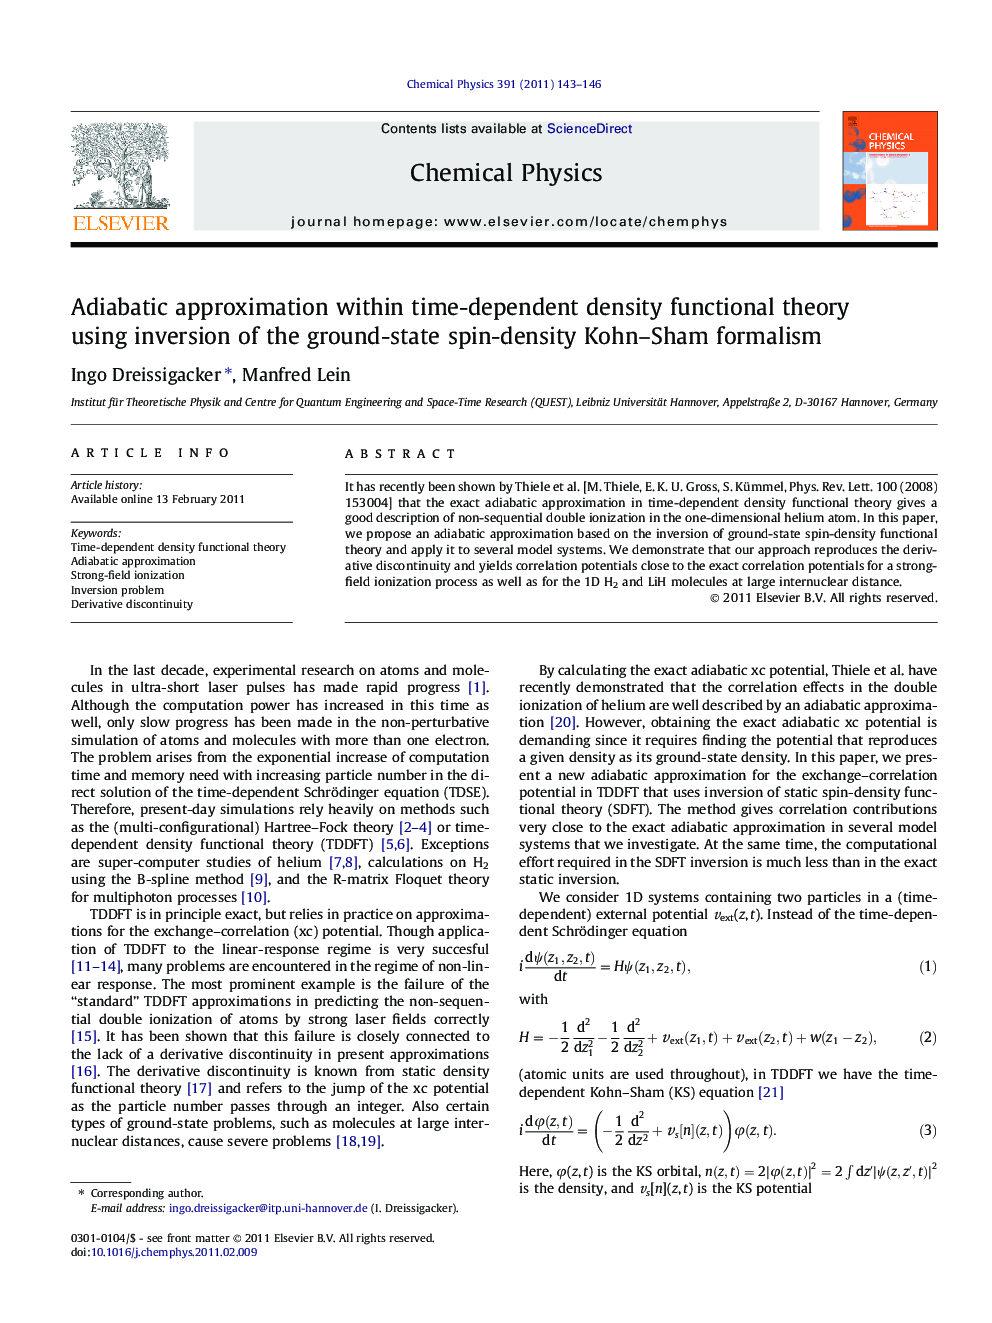 Adiabatic approximation within time-dependent density functional theory using inversion of the ground-state spin-density Kohn-Sham formalism